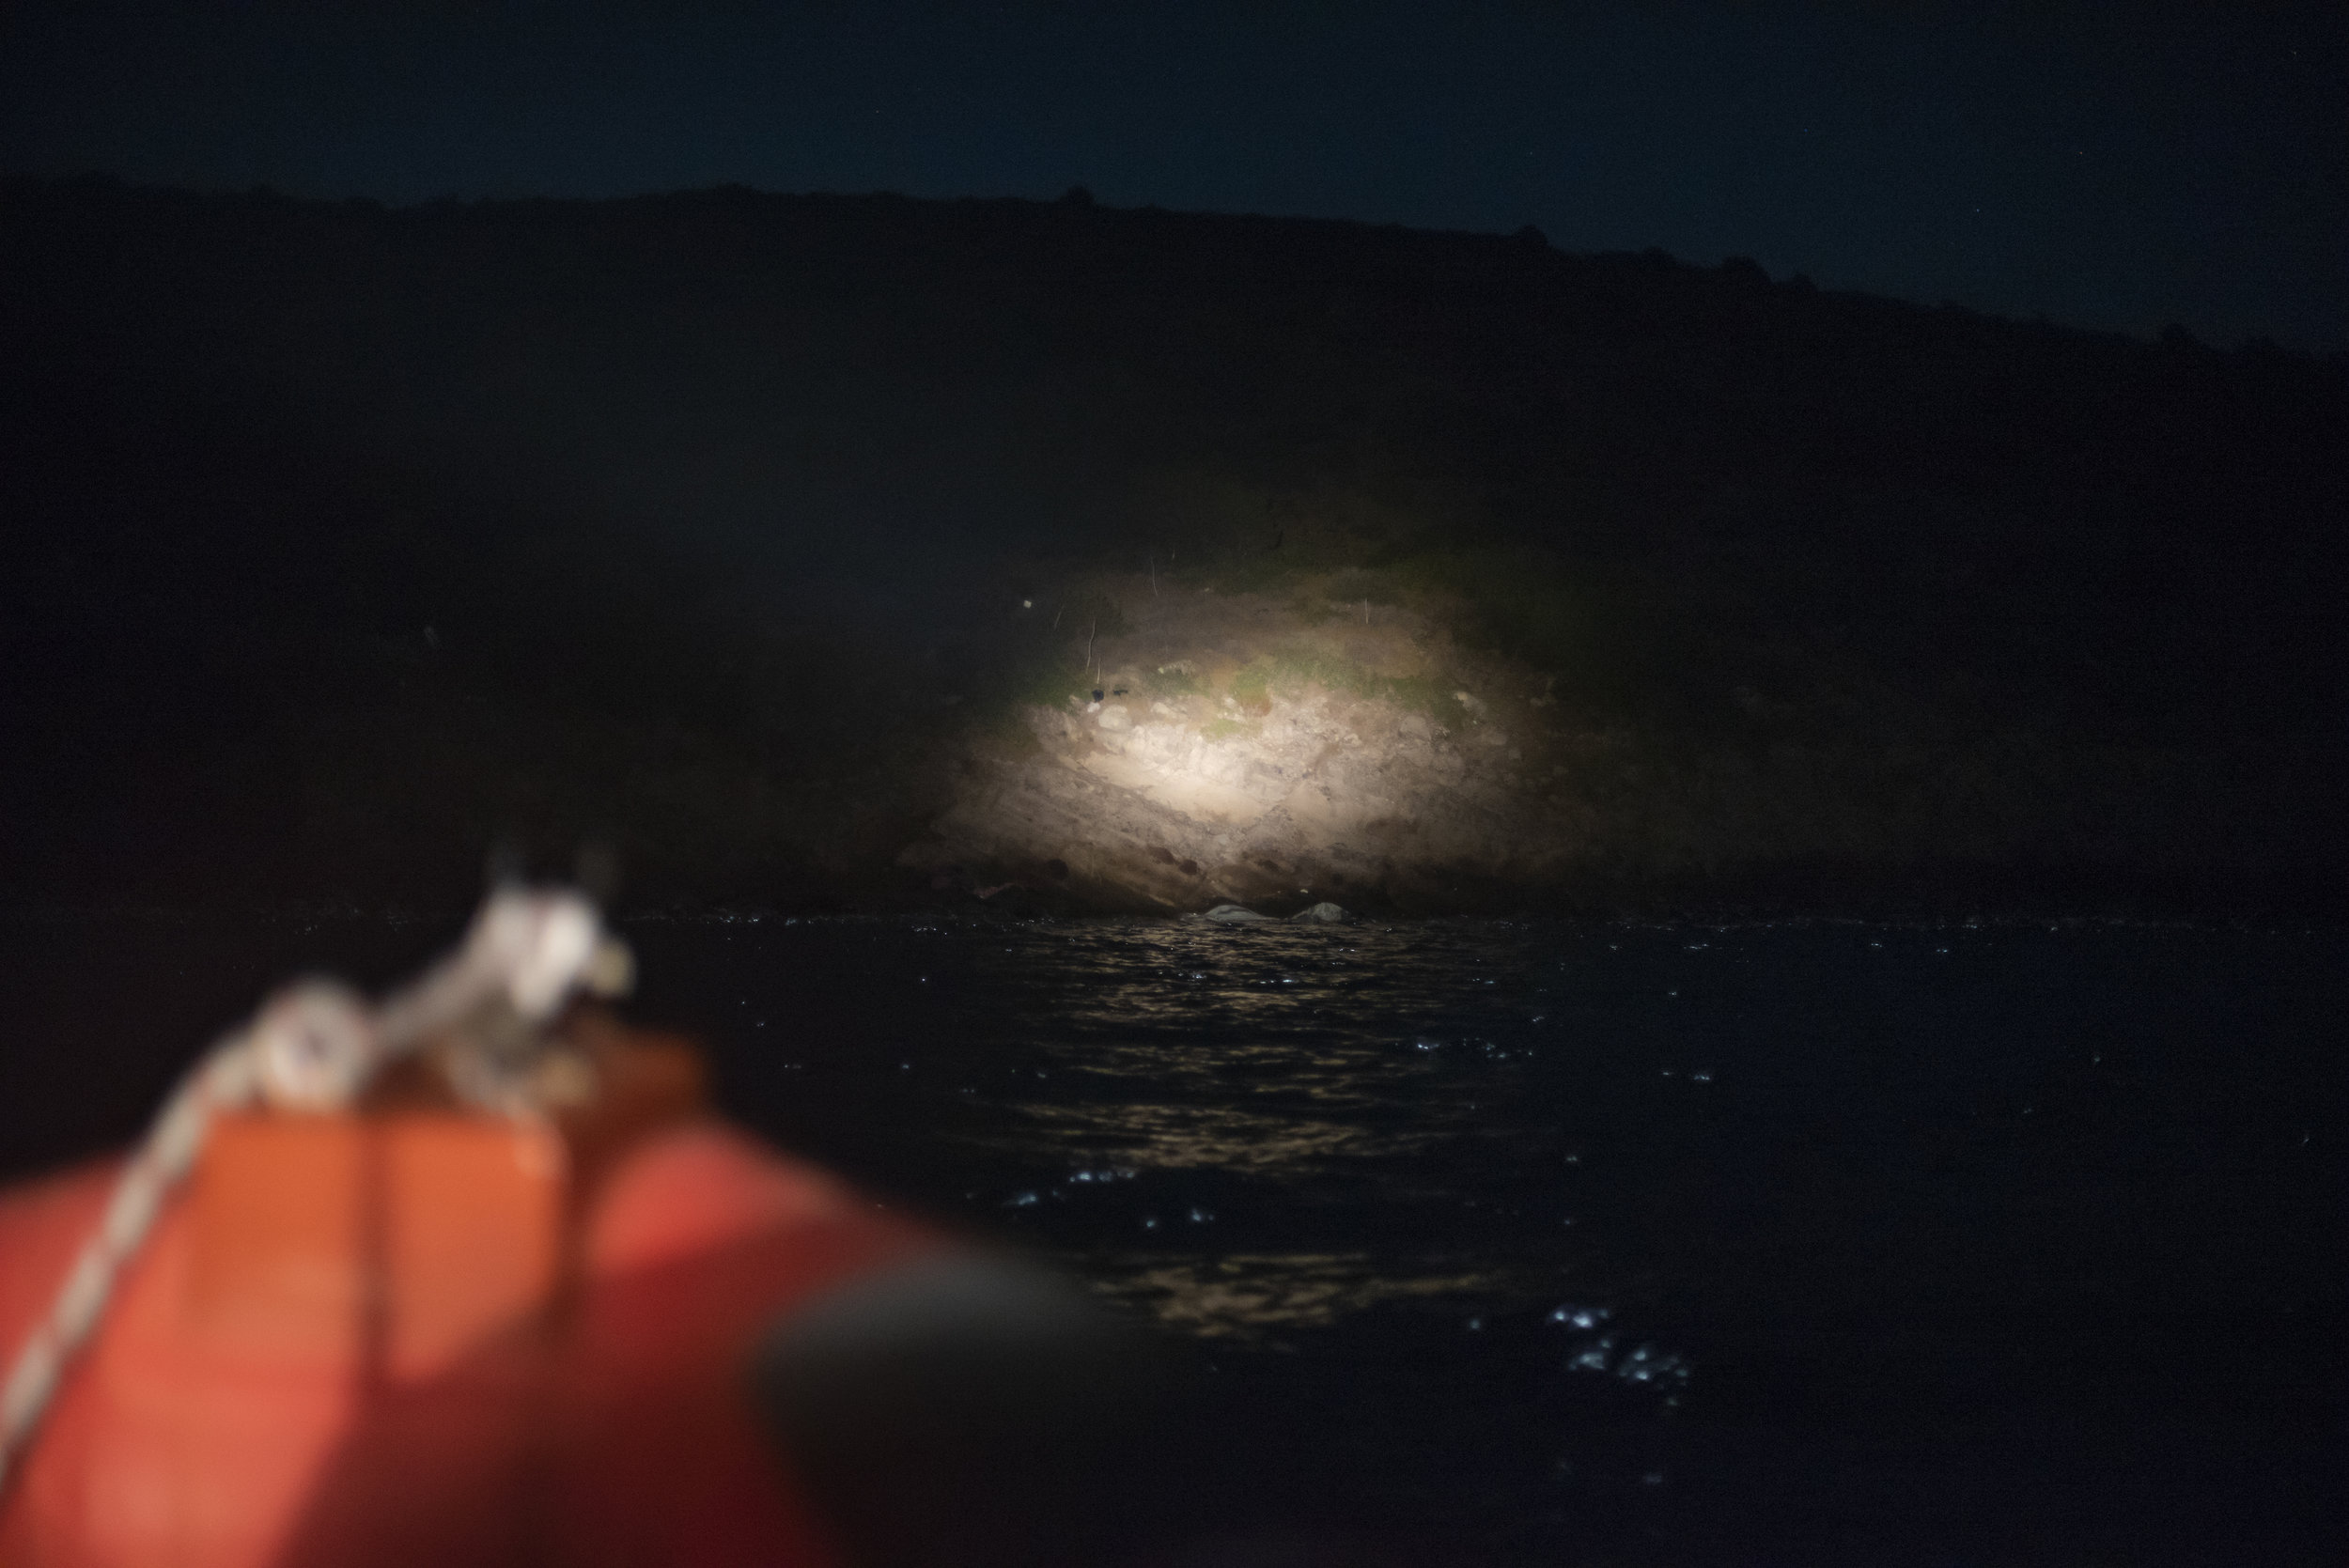  Turkish Gendarmerie and coast guard do their best to interdict refugees who attempt nighttime crossings in unreliable rubber dinghies. Refugees will hide in secluded areas near the water until they figure the coast is clear. 